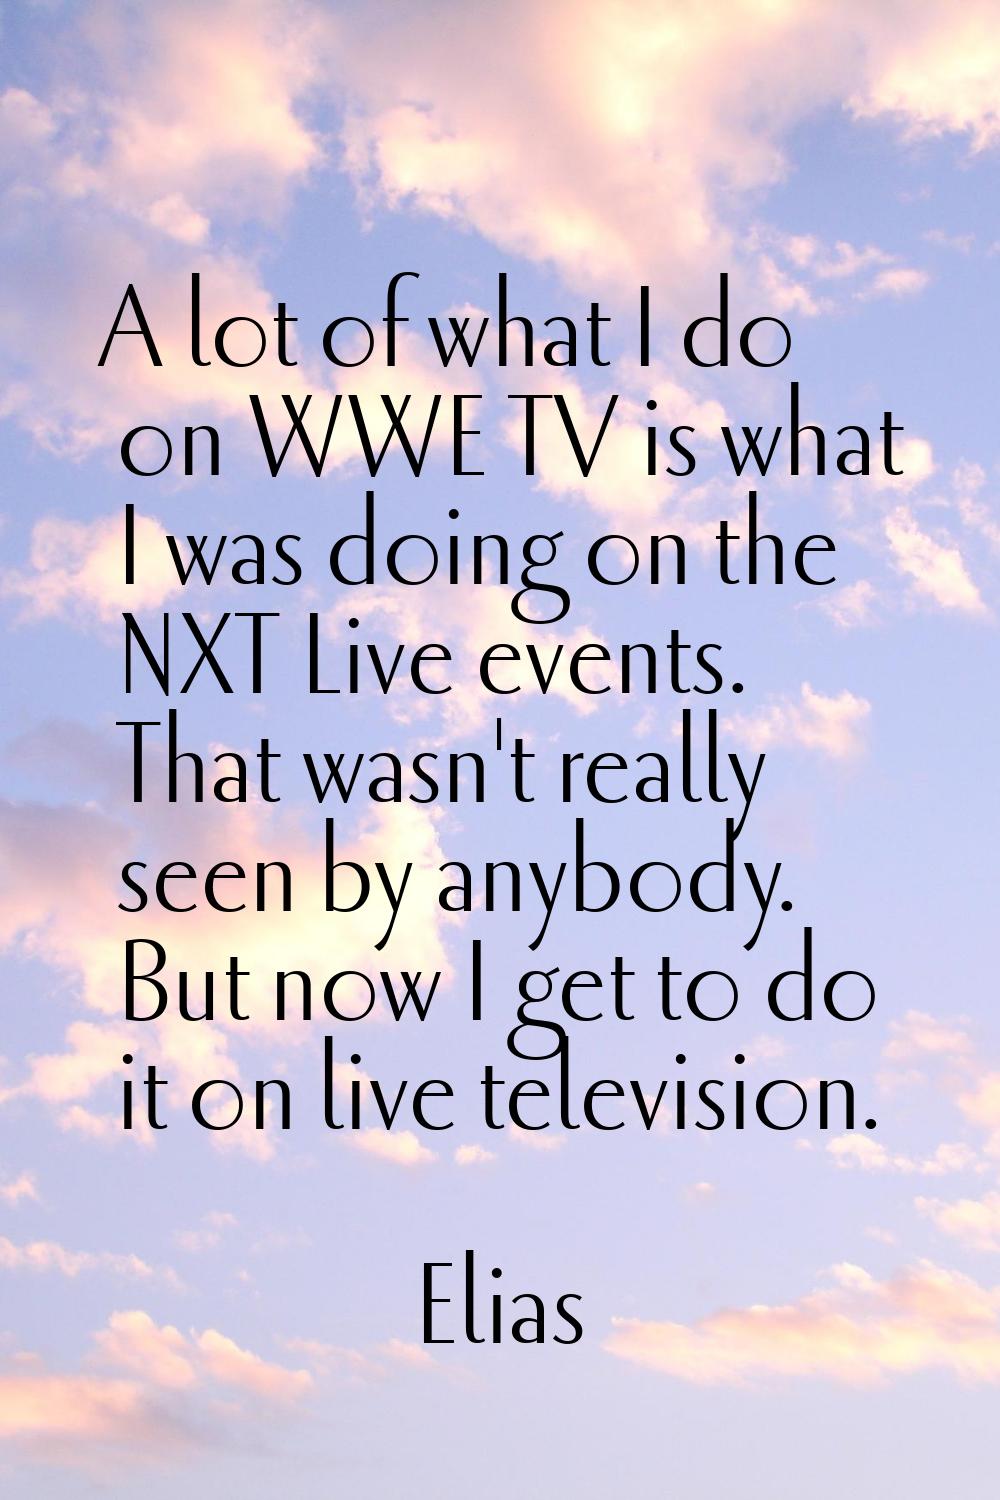 A lot of what I do on WWE TV is what I was doing on the NXT Live events. That wasn't really seen by